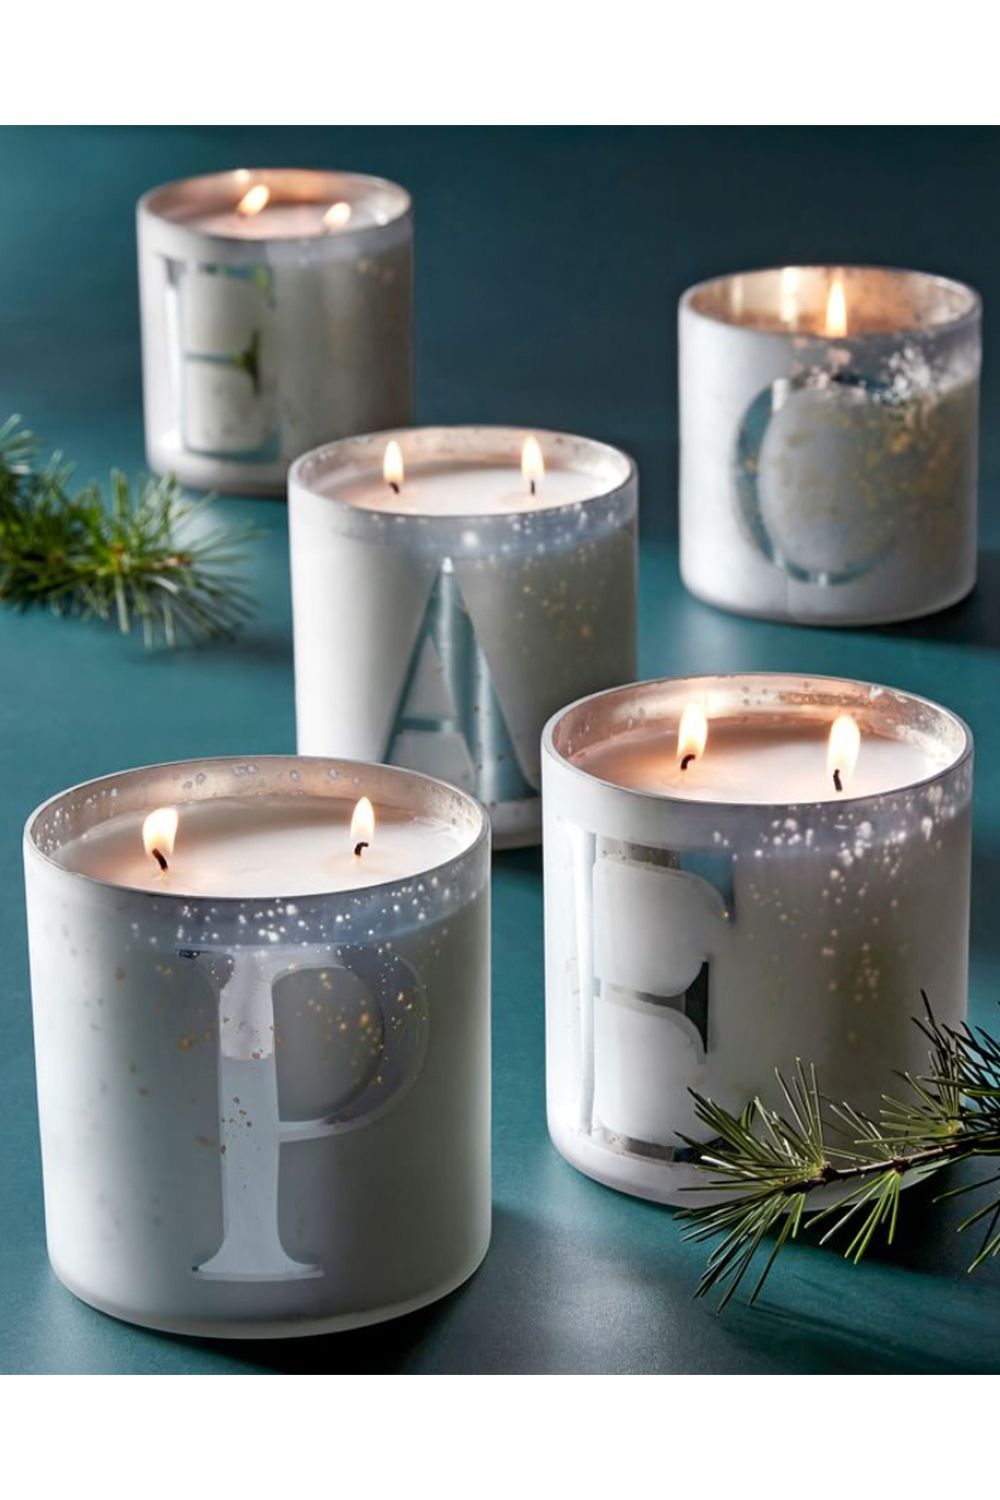 Concrete Wooden Wck Soy Wax candles Home Decoration Gift Idea